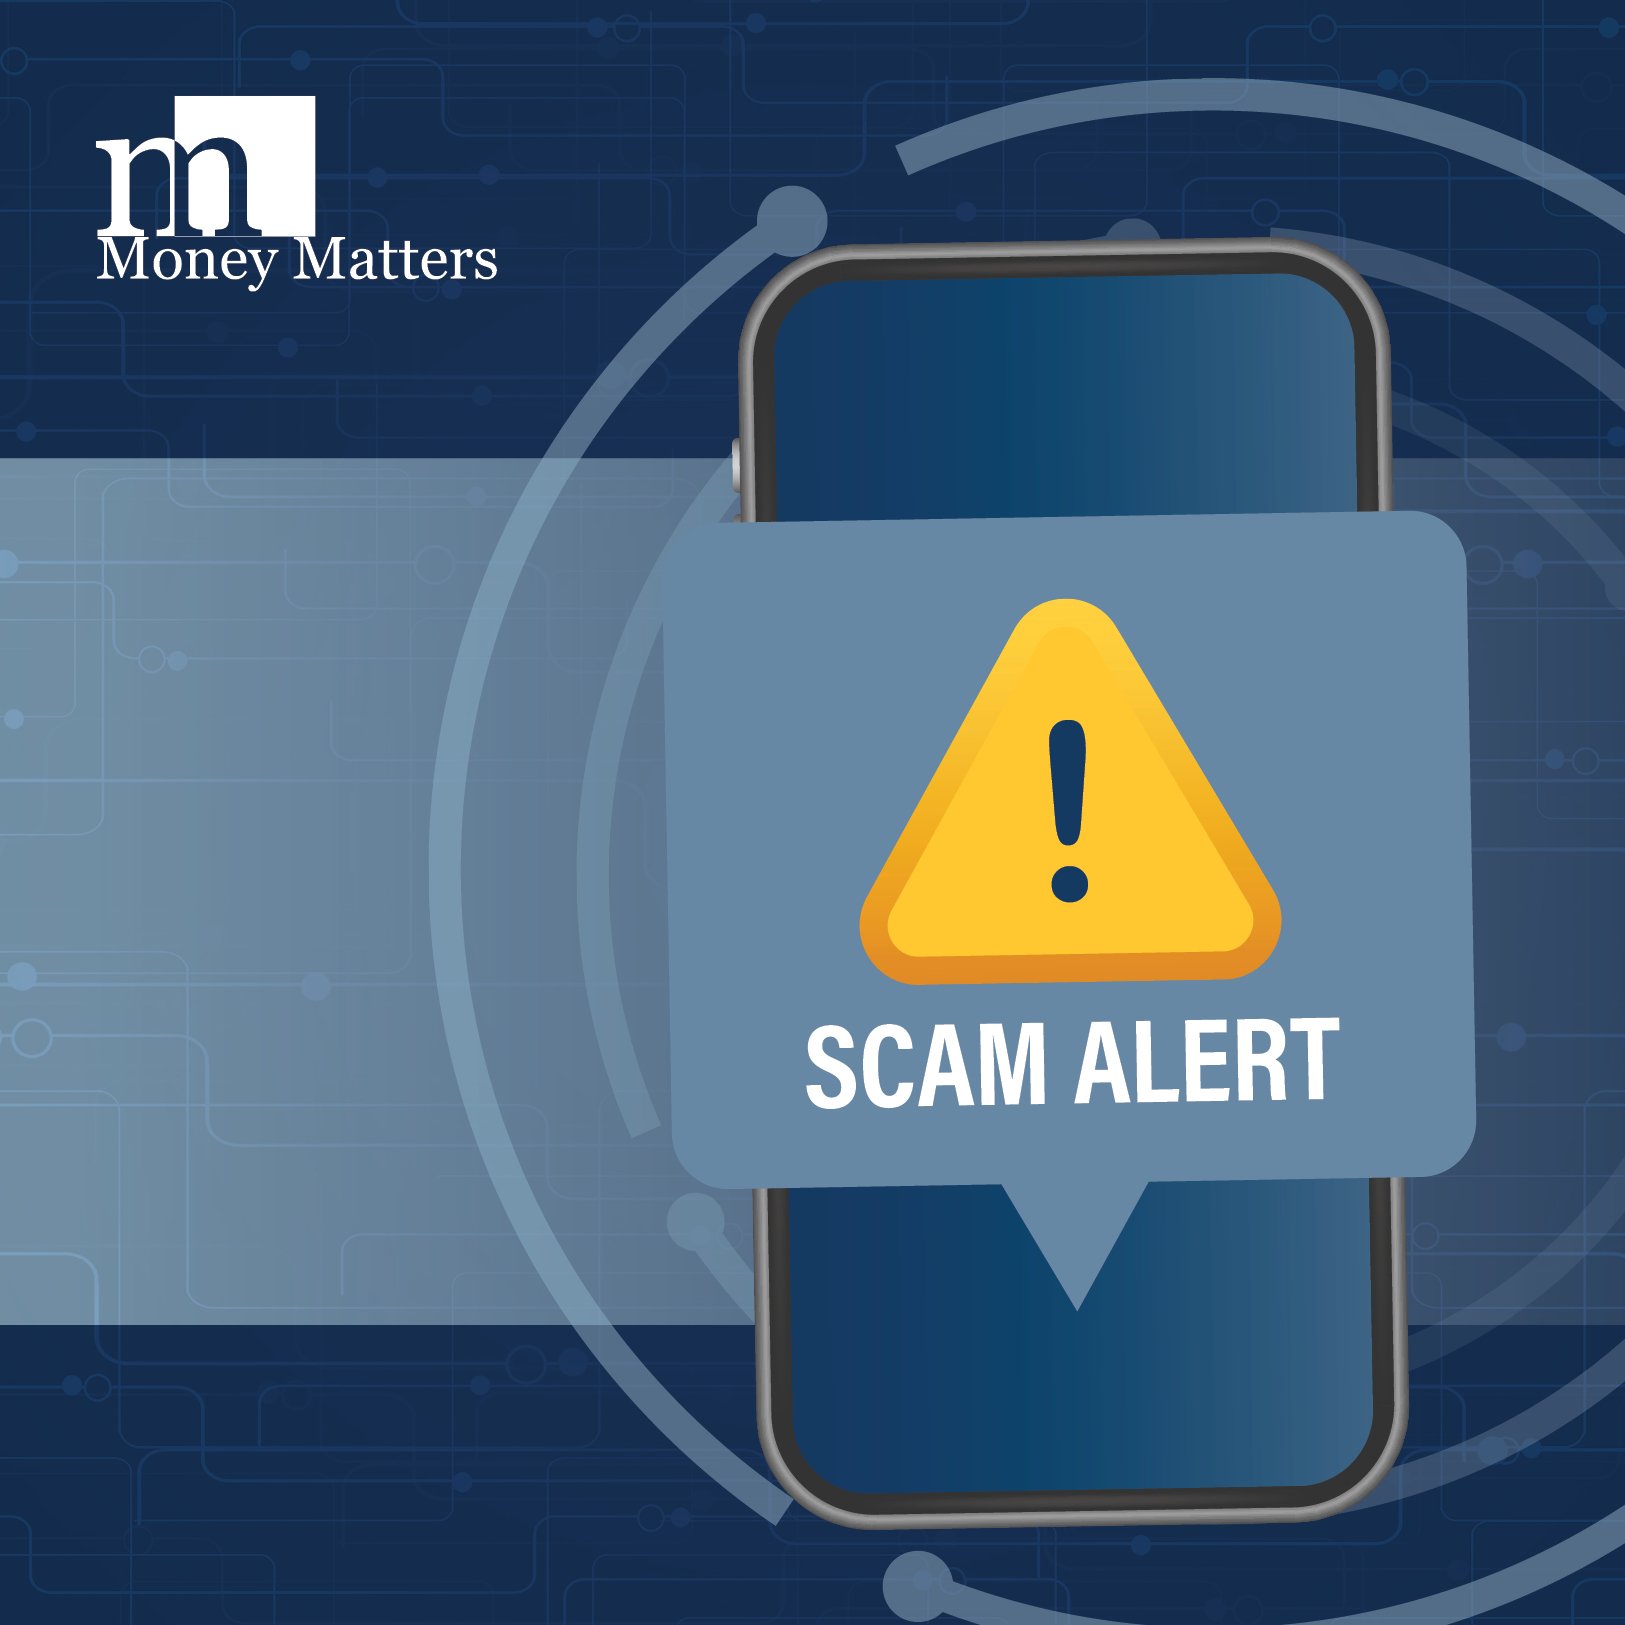 A cell phone with a yellow yield sign covering it and "scam alert" written below it.